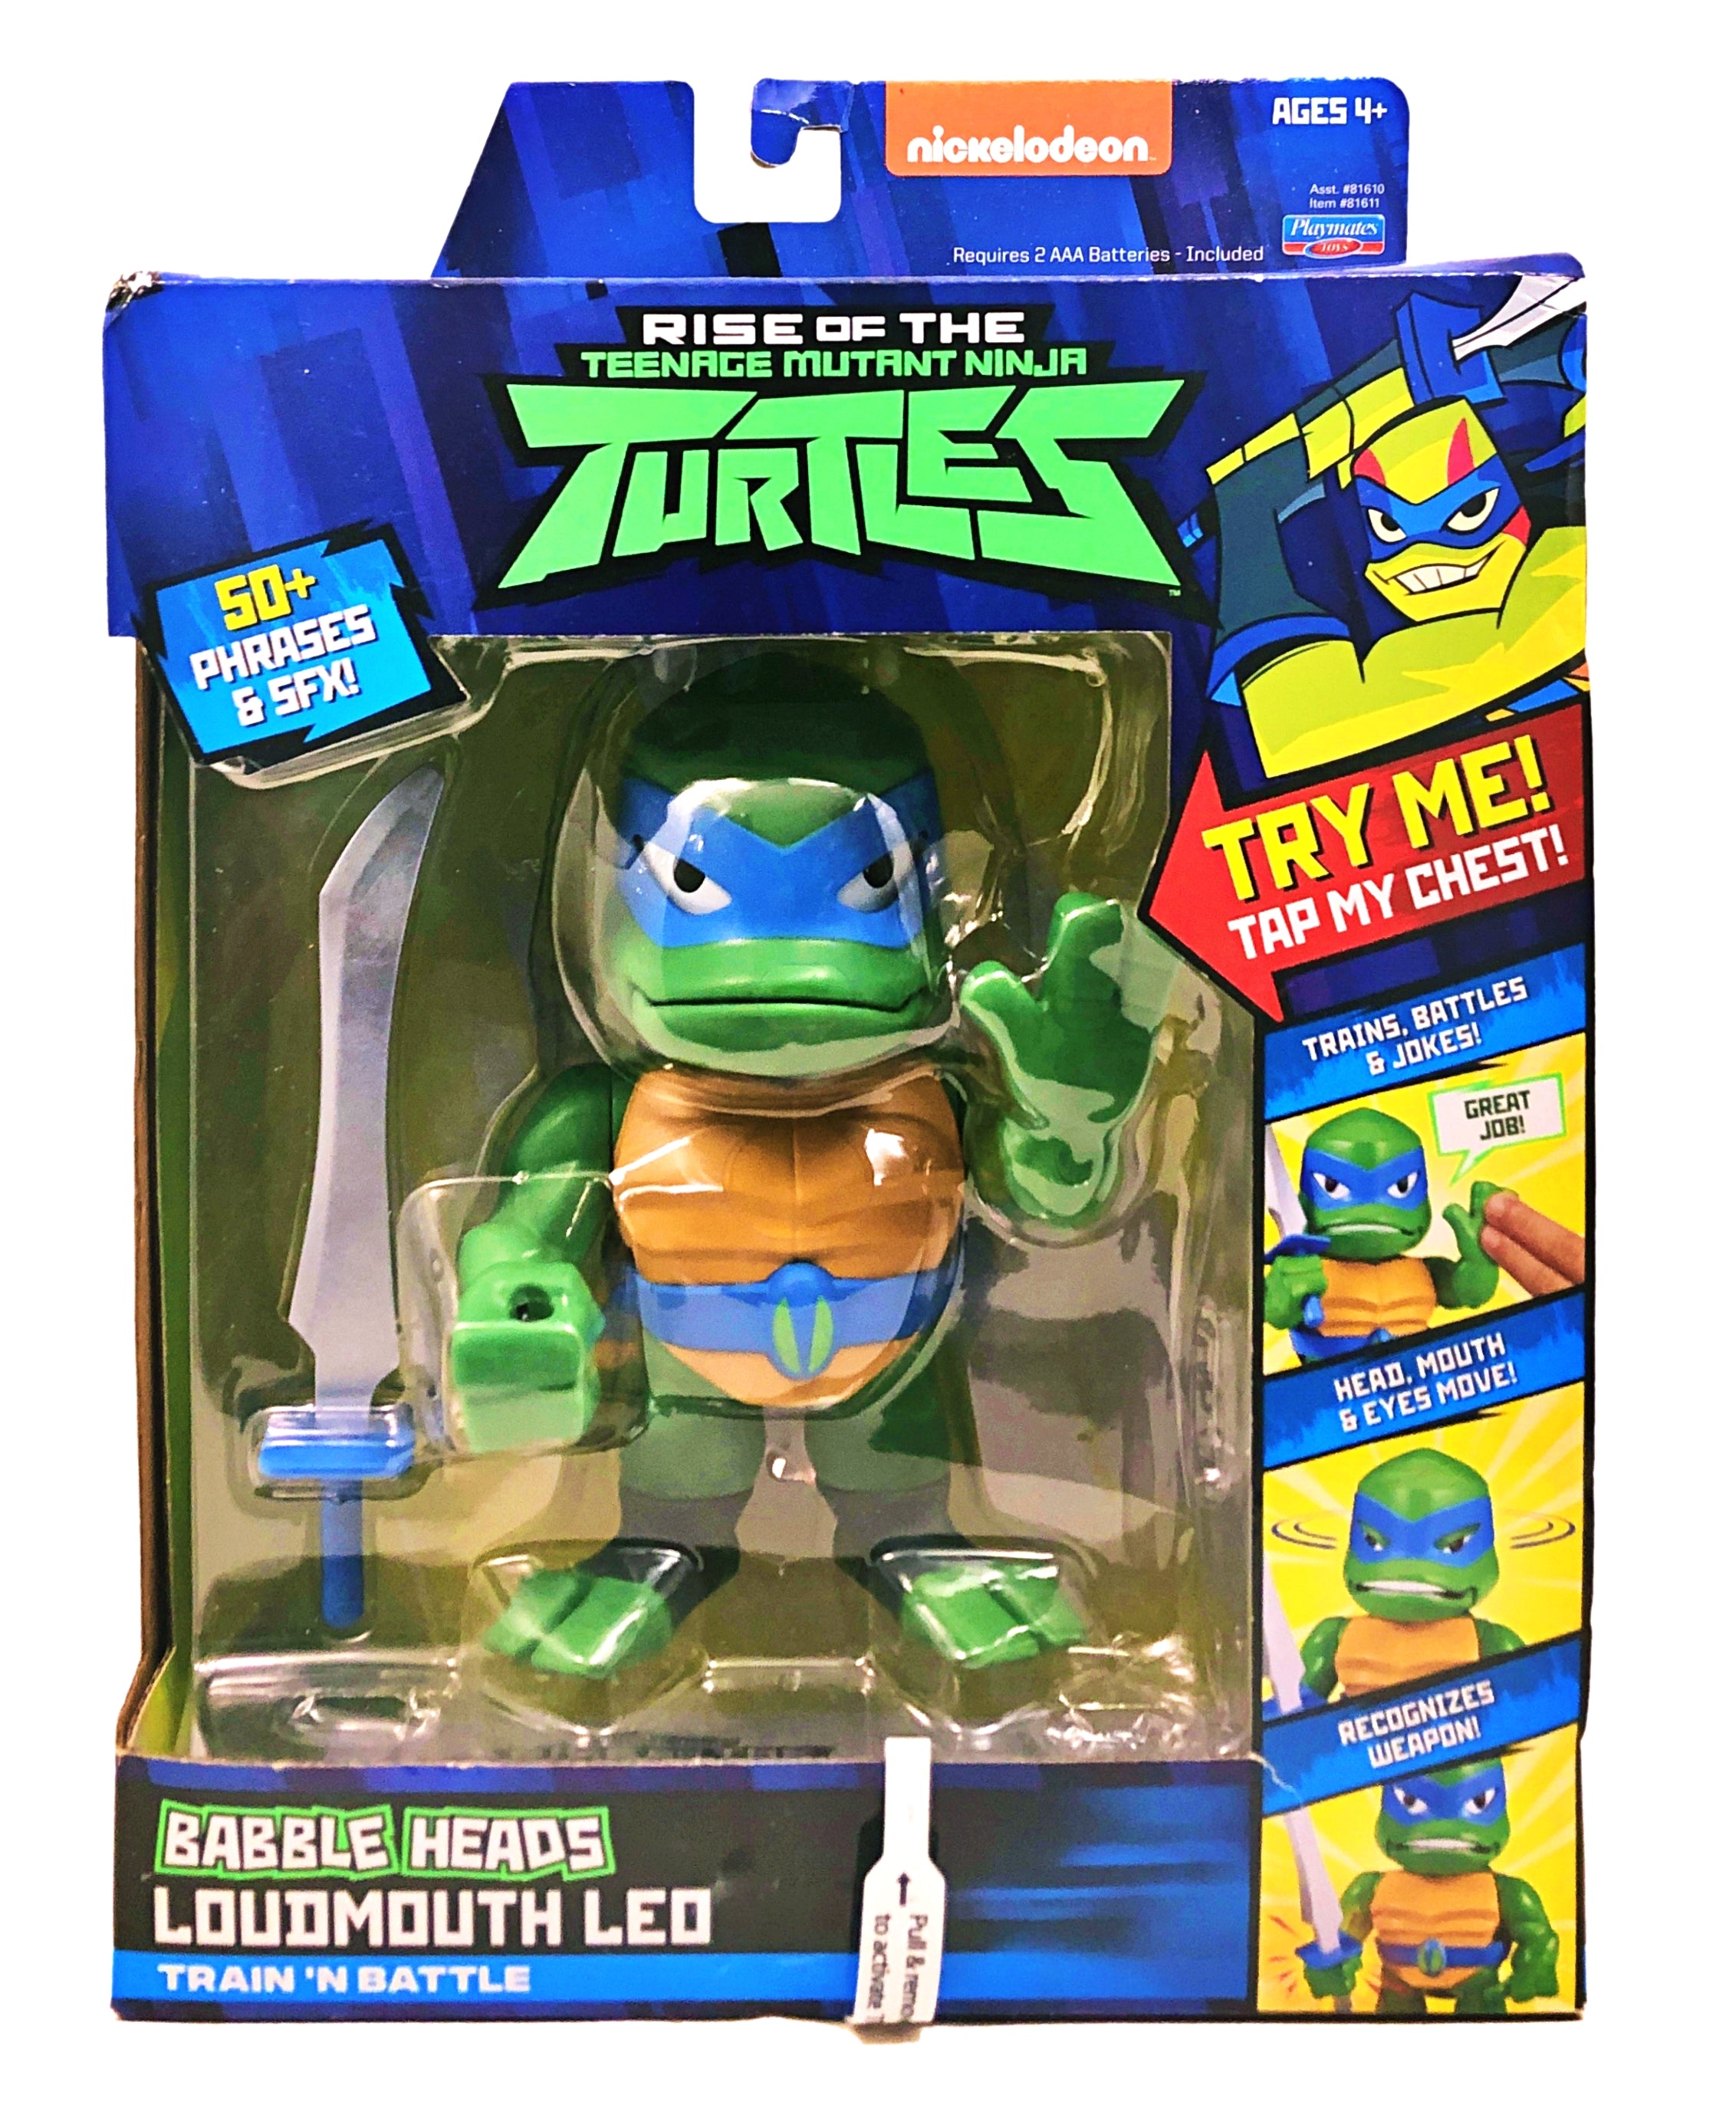 Rise of the TMNT's Babble Heads Loudmouth Leo (Playmates) - 0